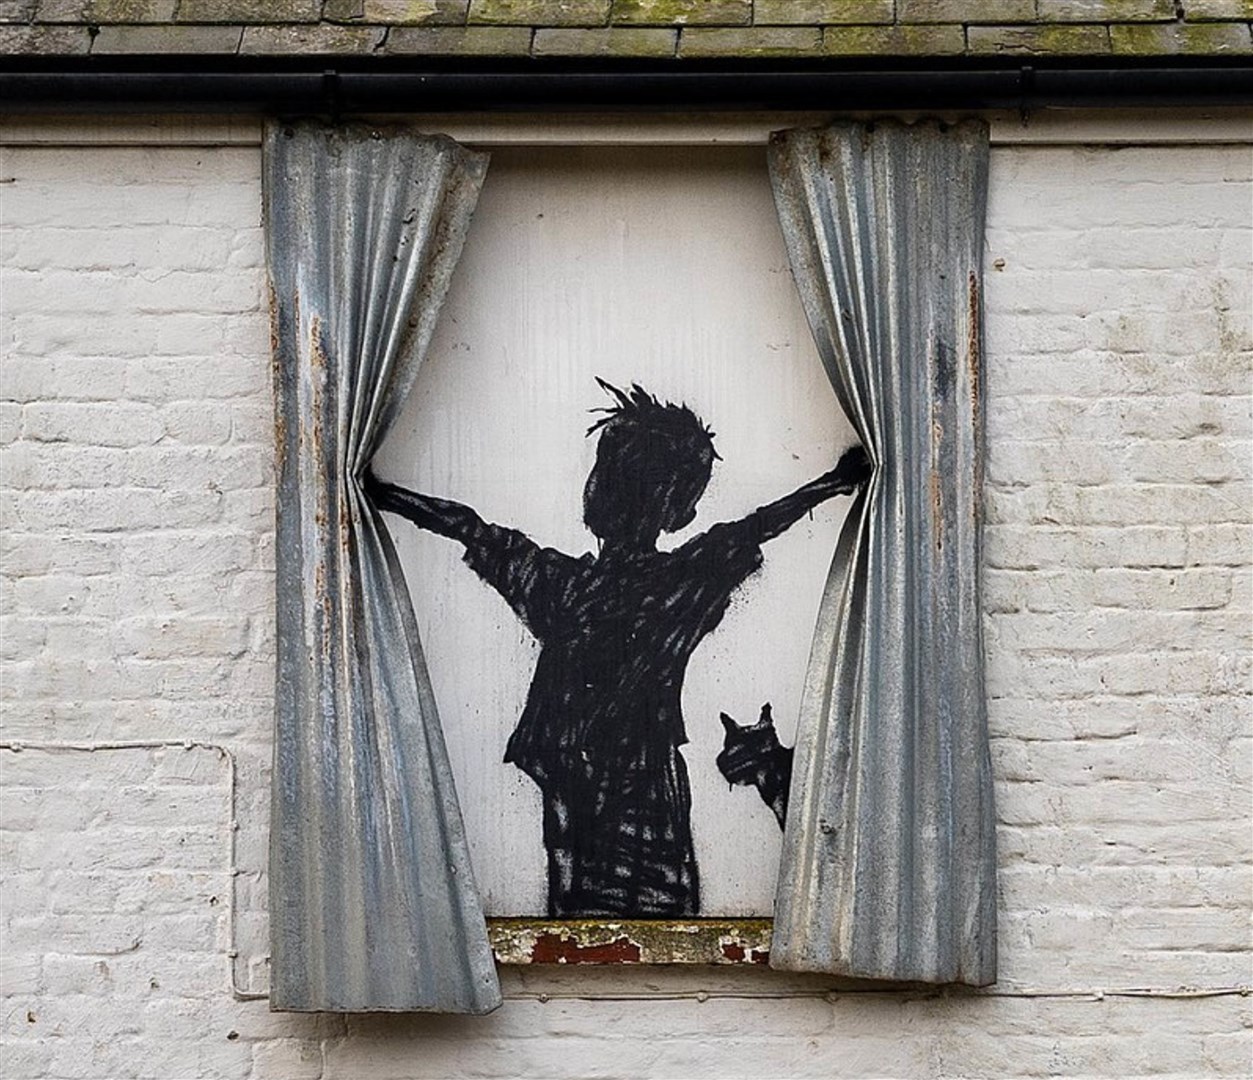 The artwork had corrugated iron curtains (Banksy/Instagram)